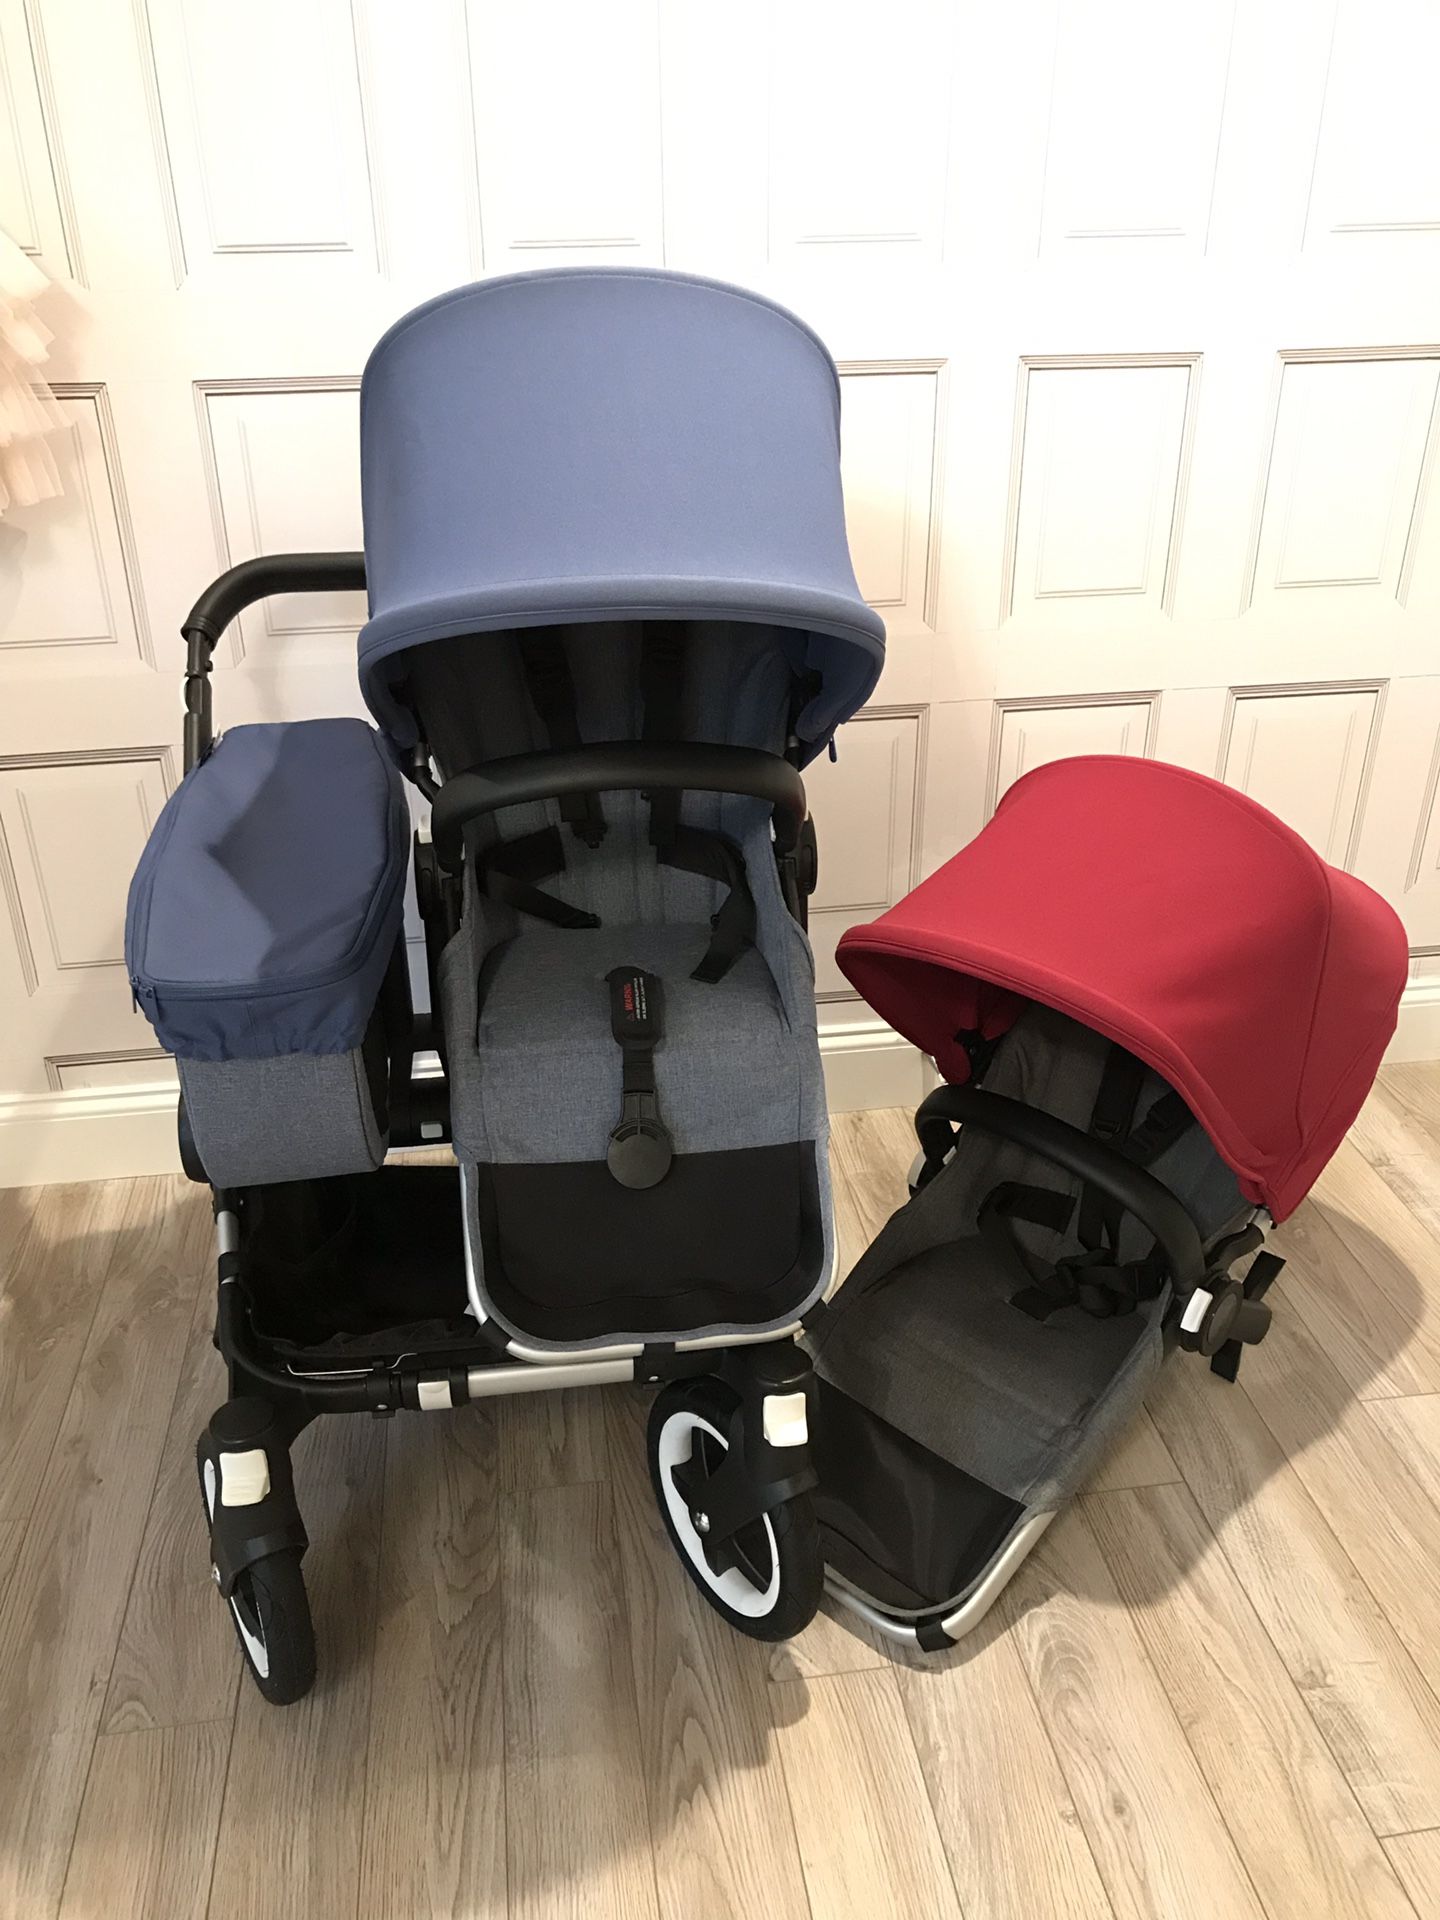 Bugaboo Donkey 2 Duo Double Or Single Stroller. New(open Box)